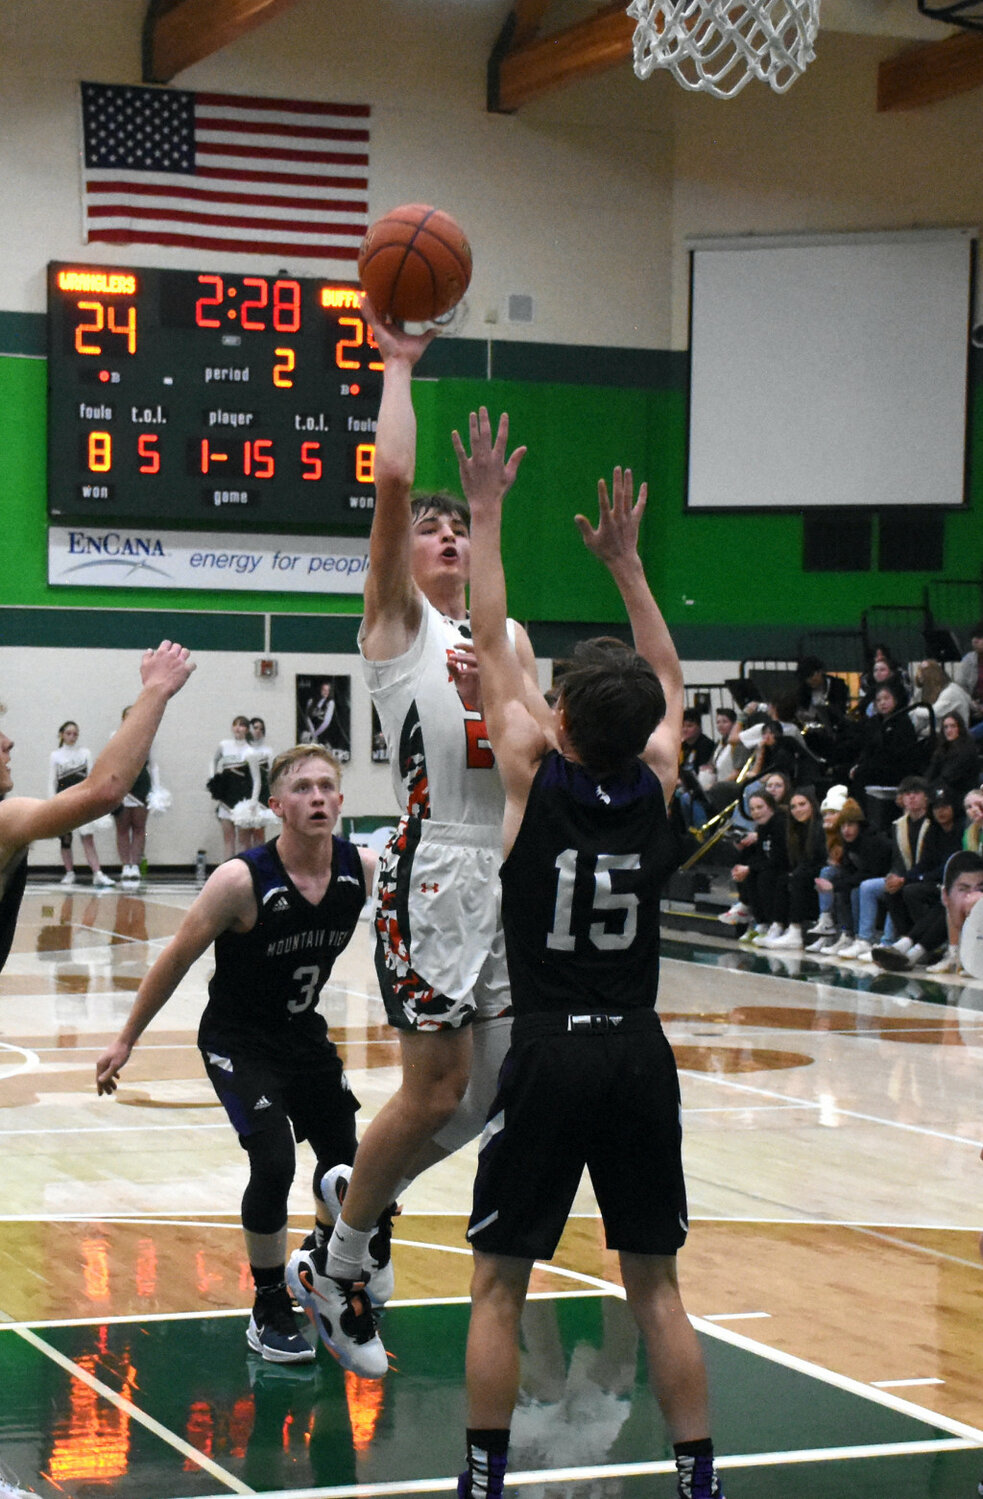 Robert Galbreath photos
Junior Owen McMillen catches air against Lander on Jan. 27. McMillen snagged 3A All-Conference honors for the 2022-2023 basketball season.
Junior Josh Gosar goes up for a shot against Mountain View on Jan. 21. Gosar earned 3A All-Conference and All-State honors for the 2022-2023 basketball season.